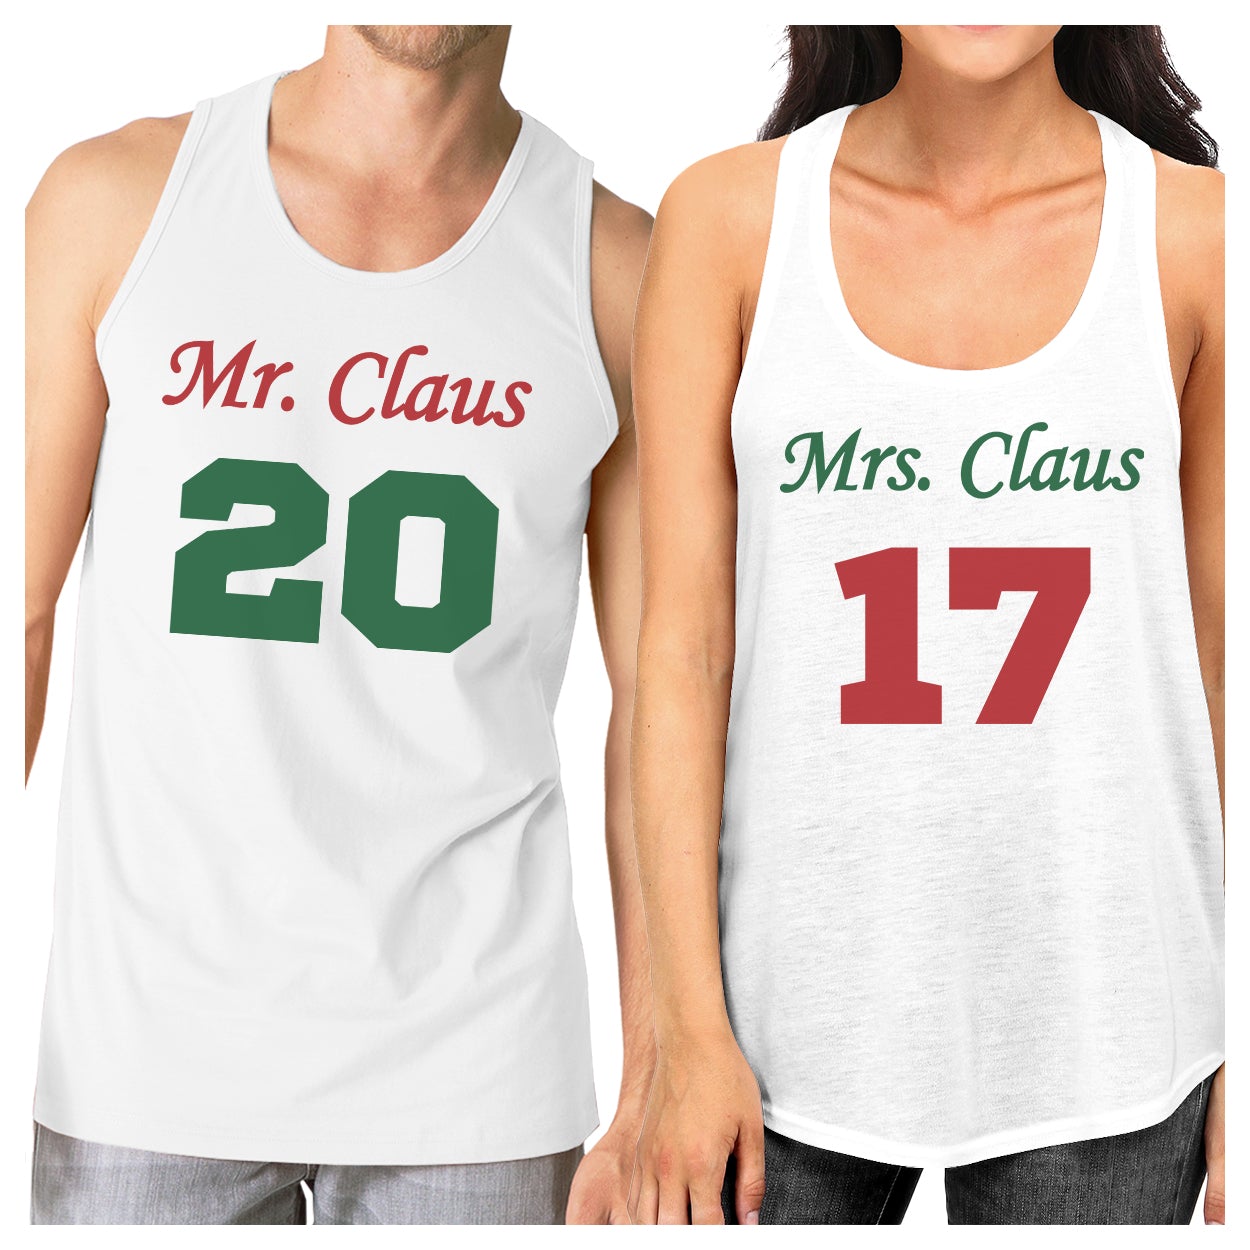 Mr. And Mrs. Claus Matching Couple White Tank Tops